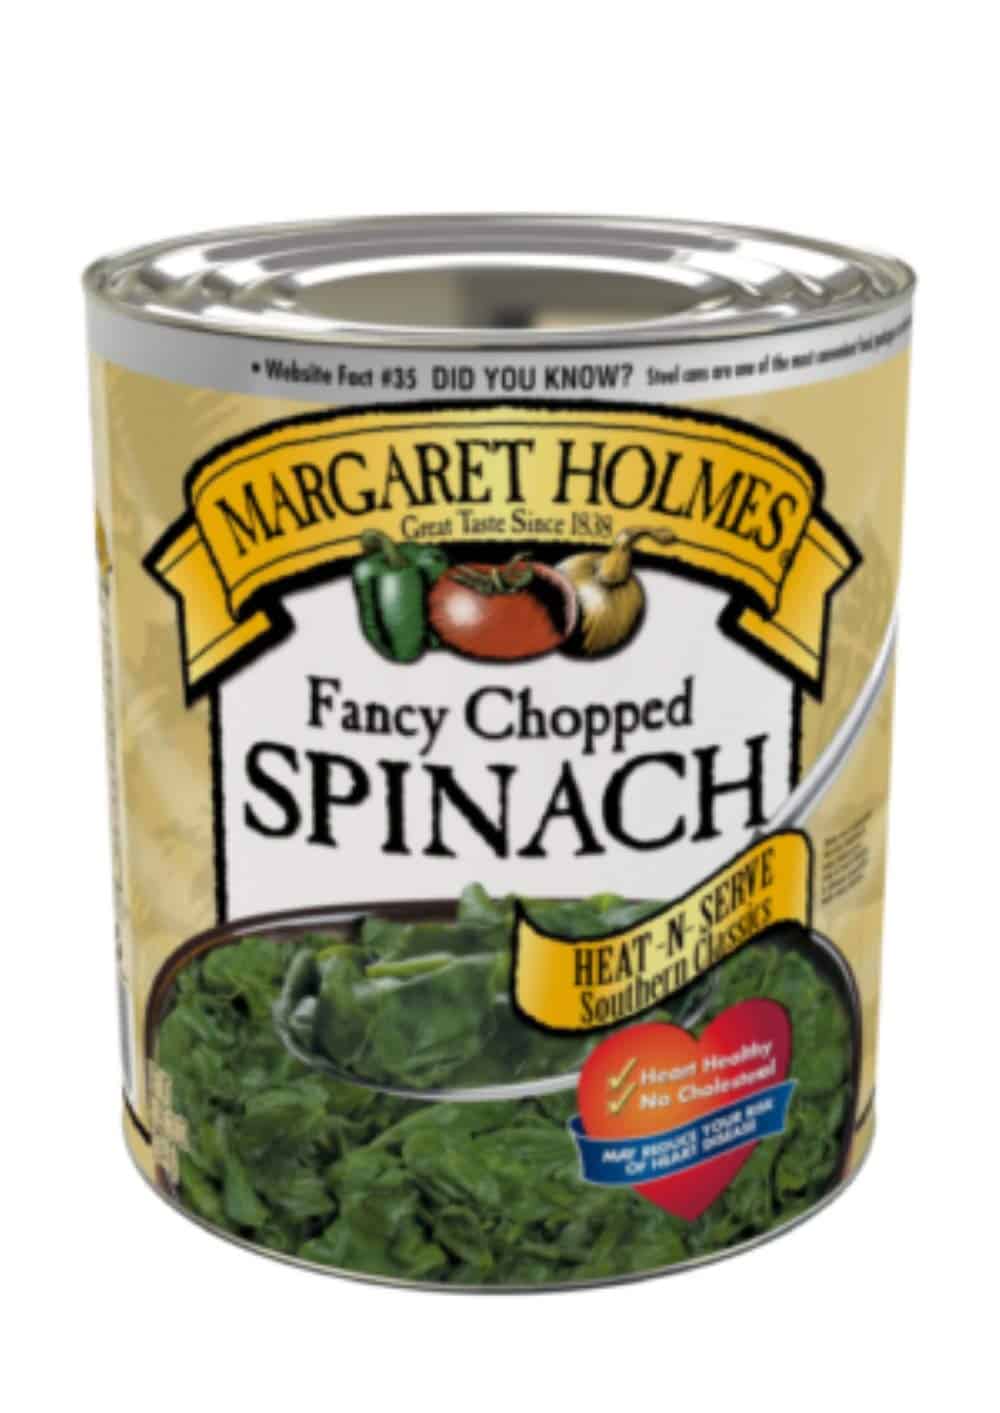 Margaret Holmes Fancy Chopped Spinach